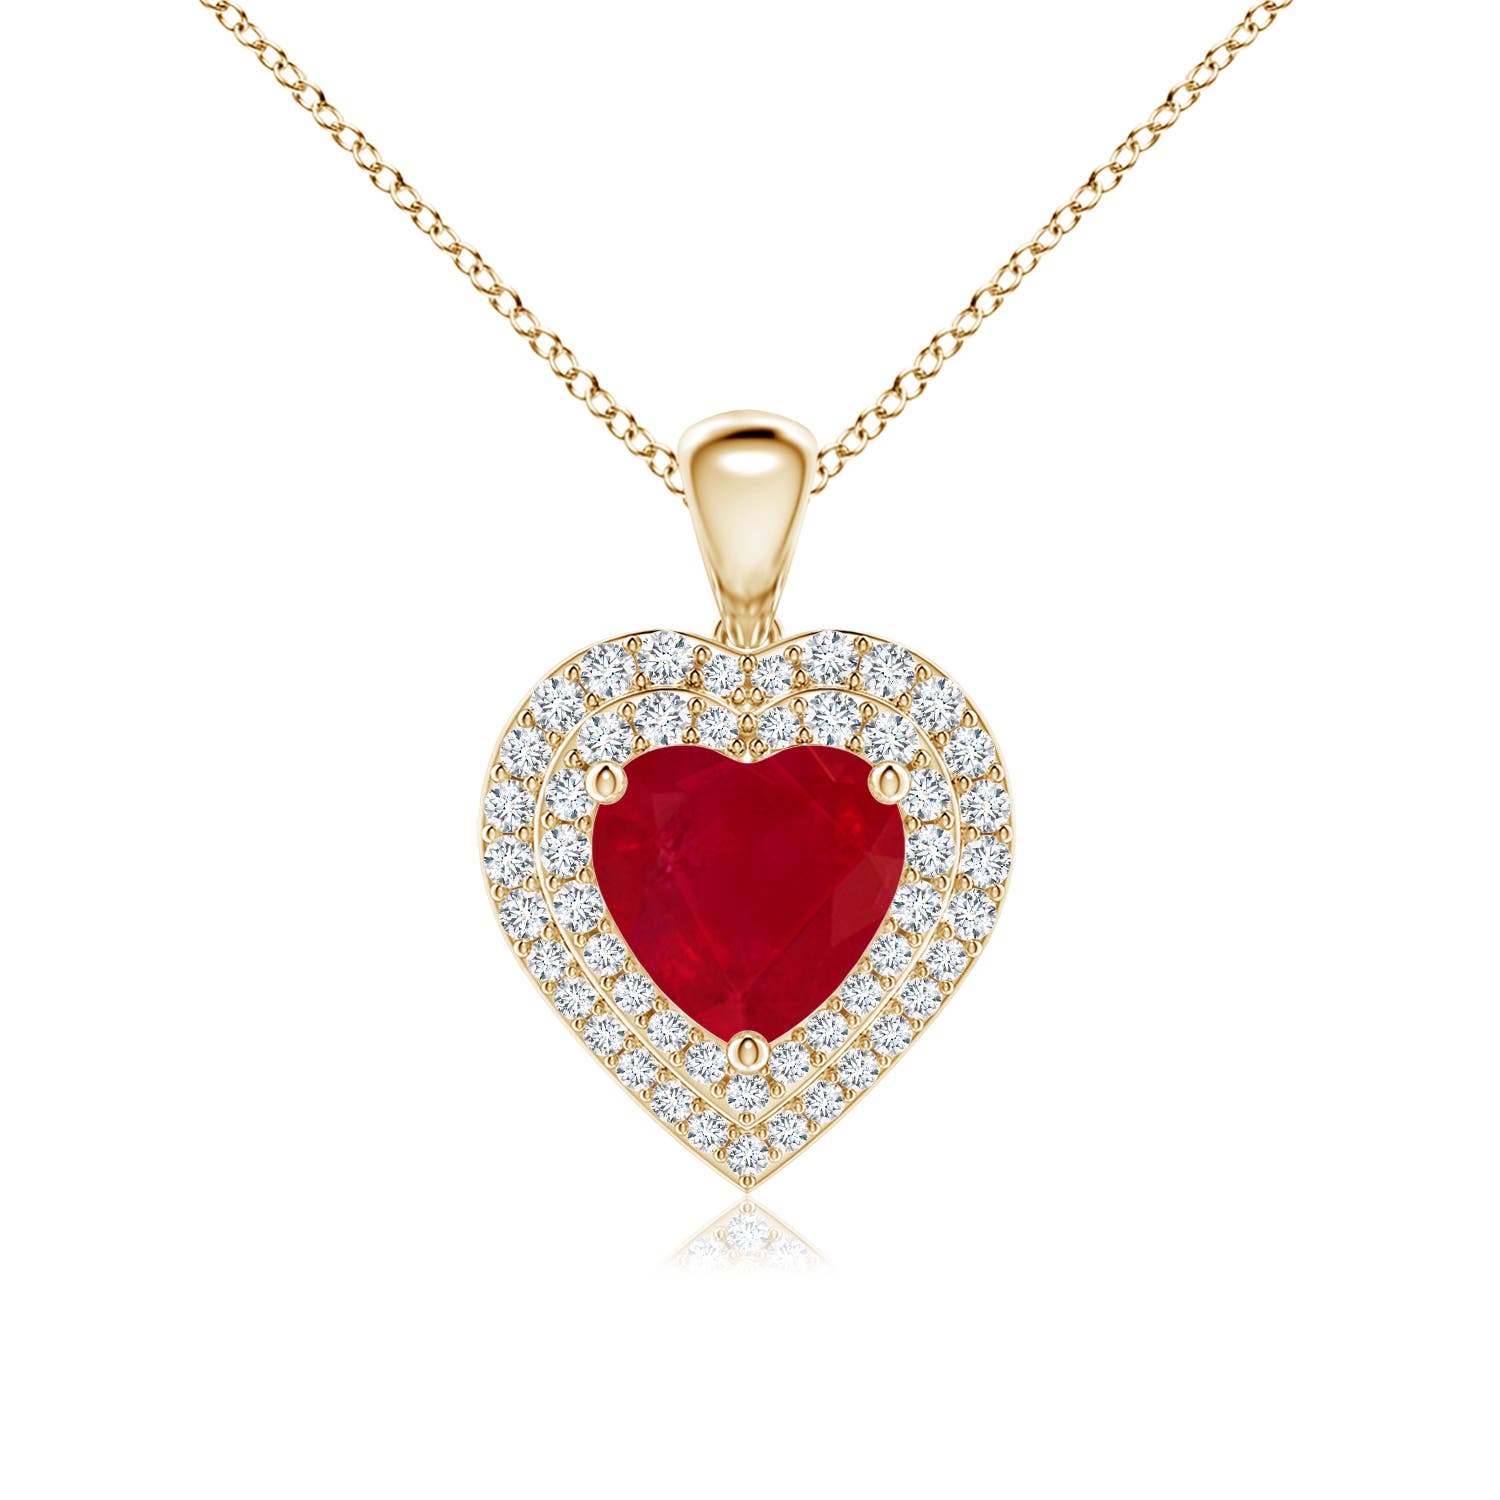 AA - Ruby / 2.08 CT / 14 KT Yellow Gold